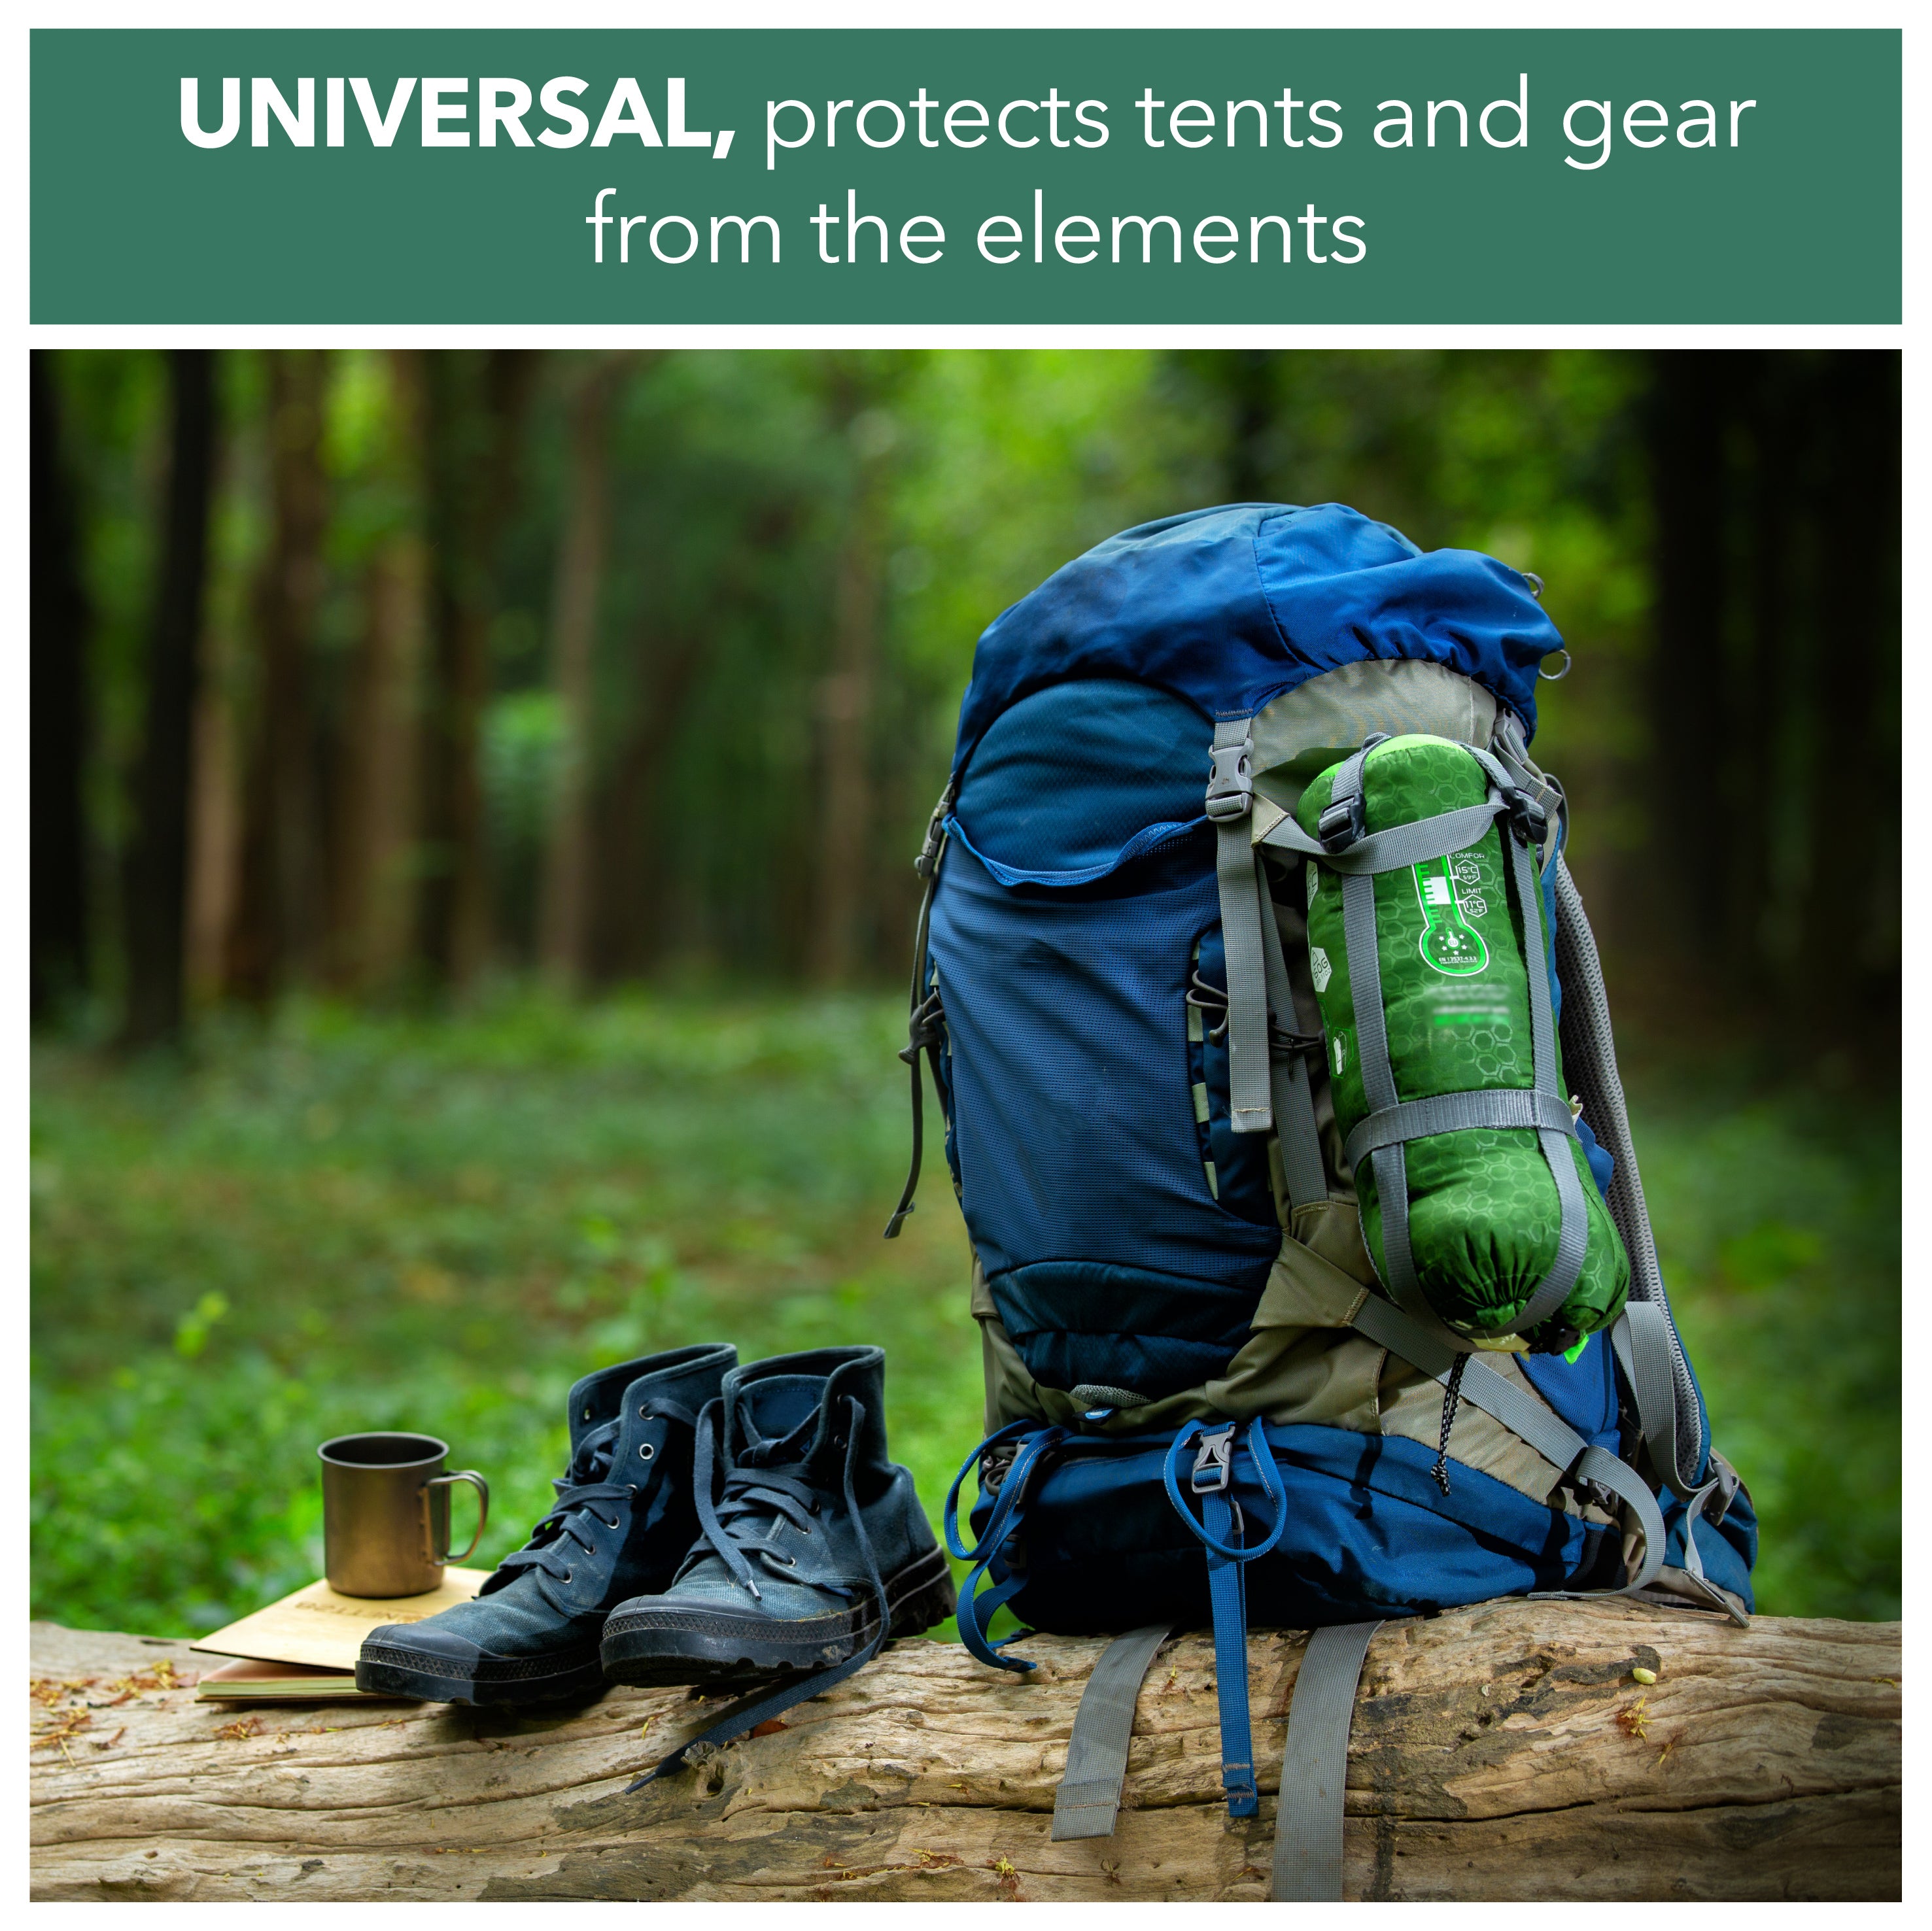 universal, protects tents and gear from the elements